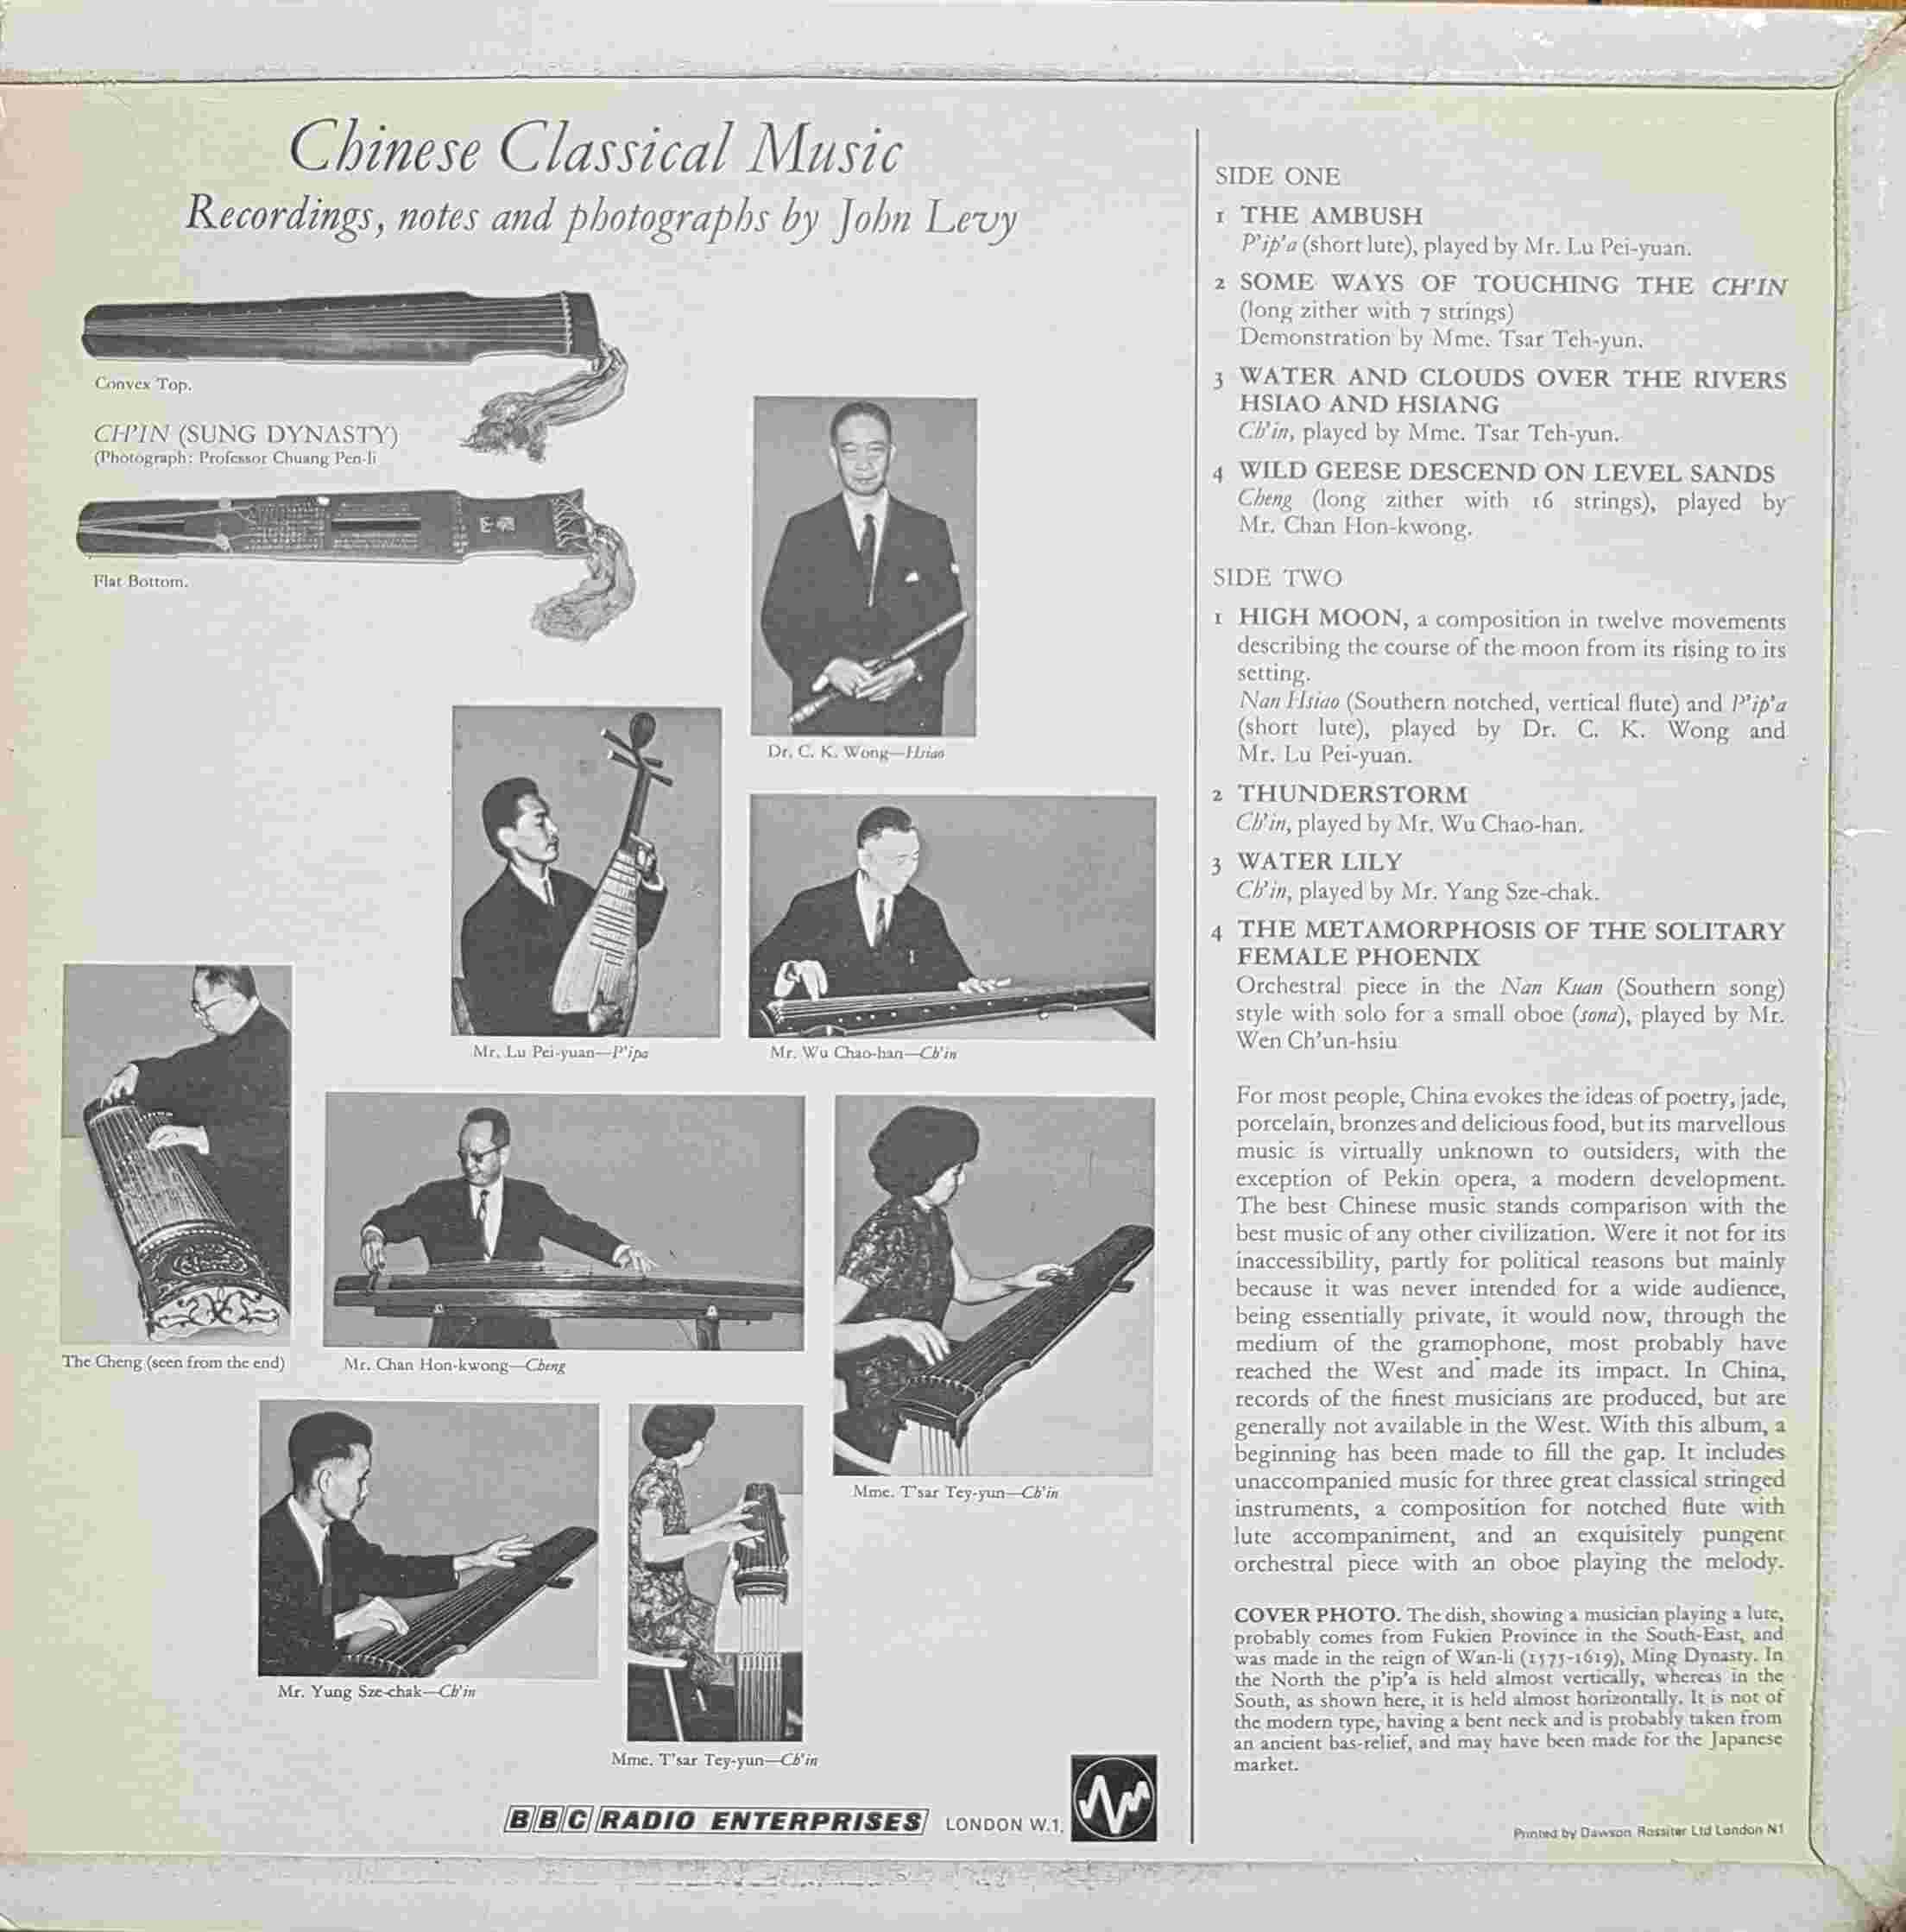 Picture of REGL 1 Chinese classical music by artist Various from the BBC records and Tapes library